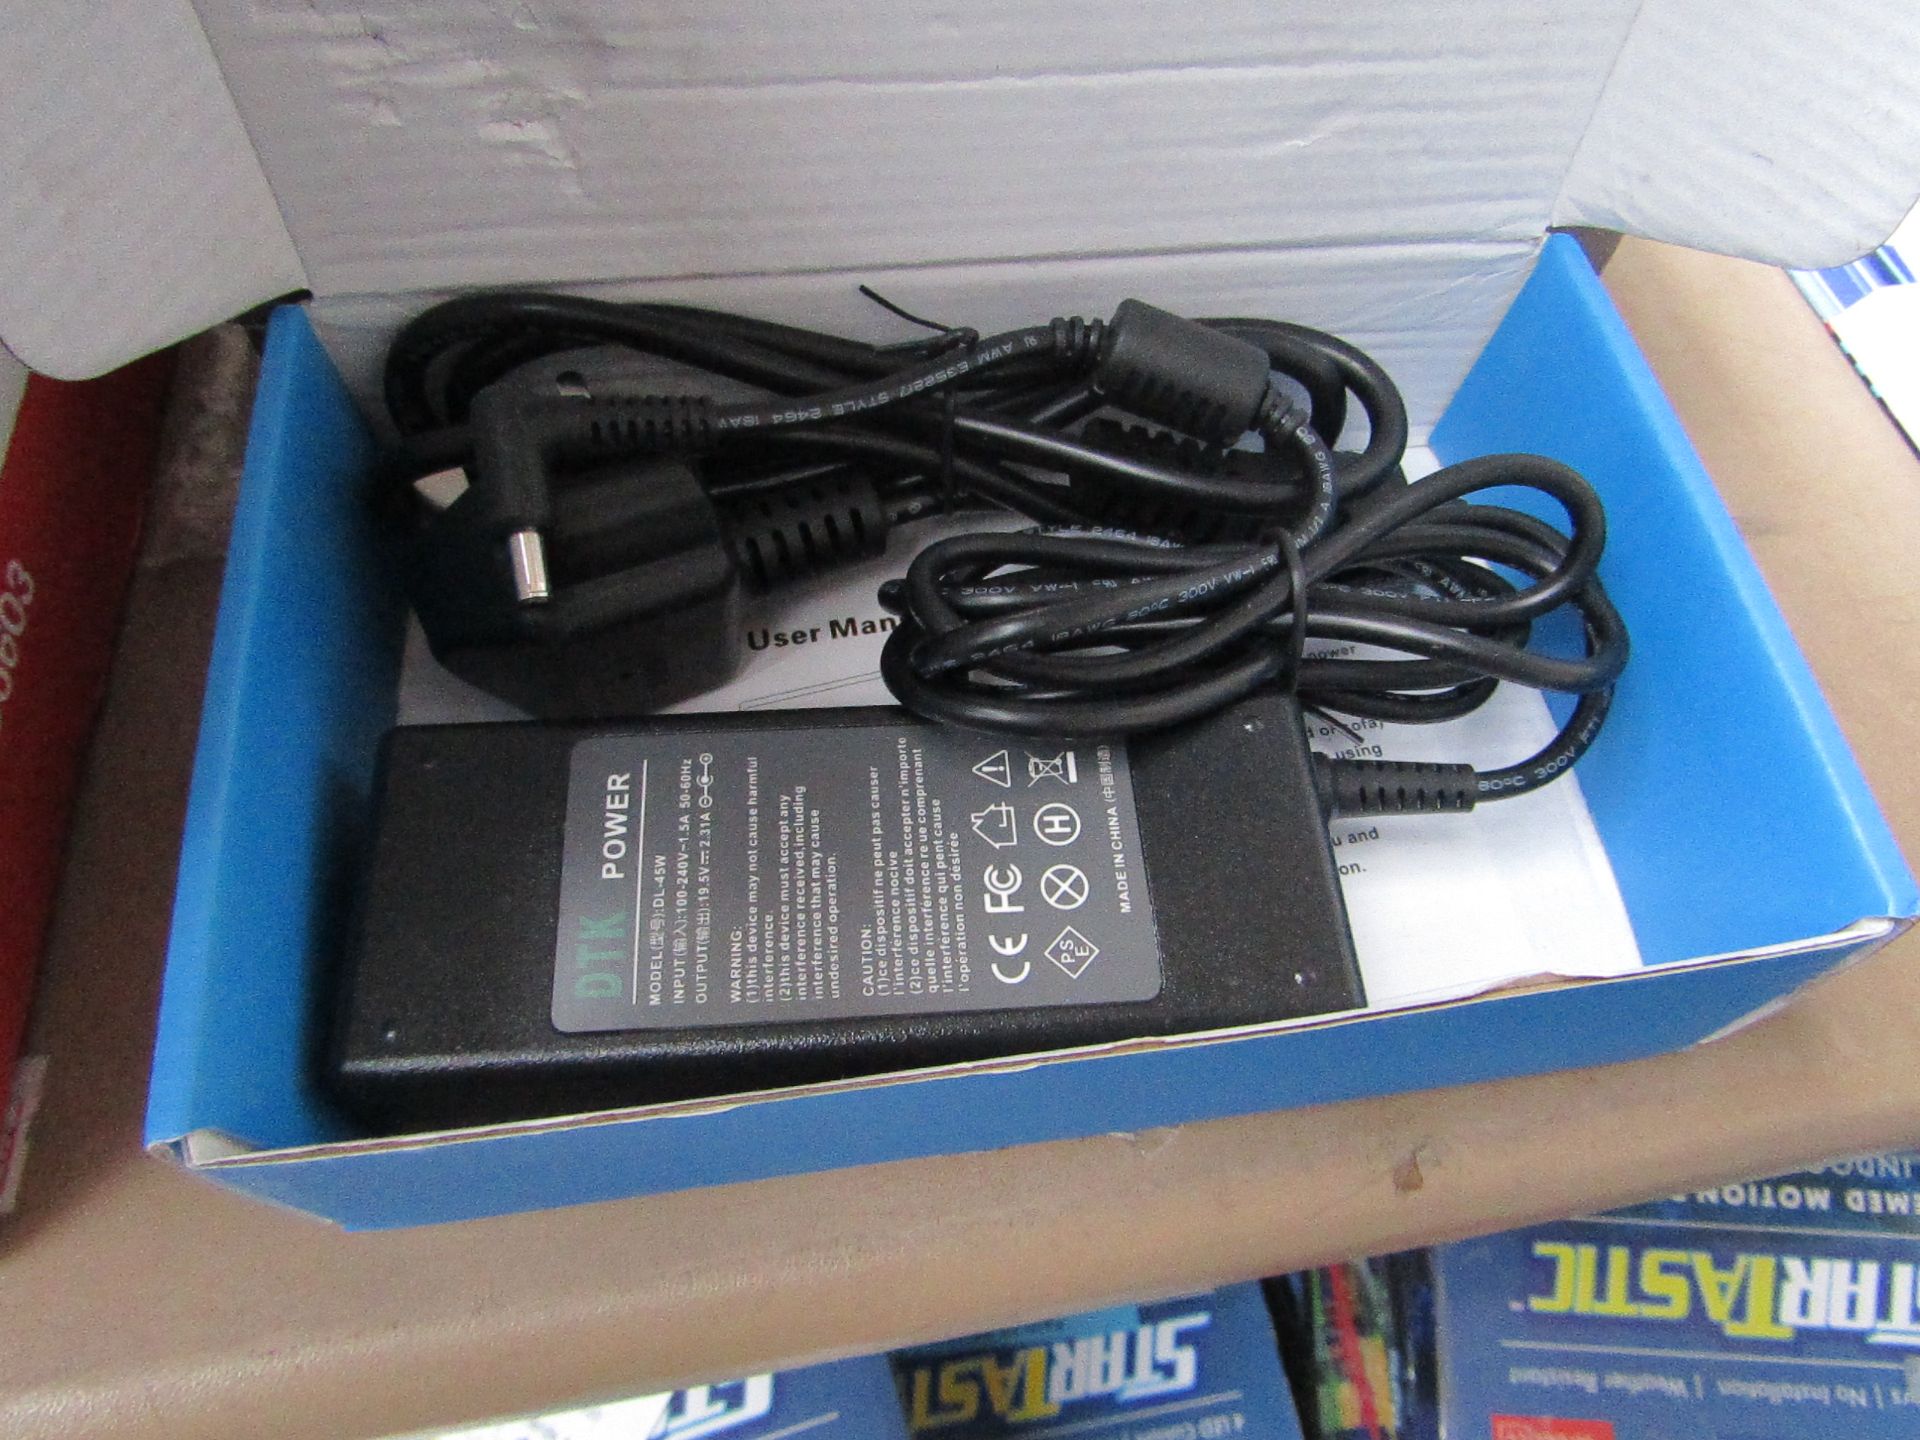 After Market replacement laptop power supply for unknown make and model, it looks simular to a